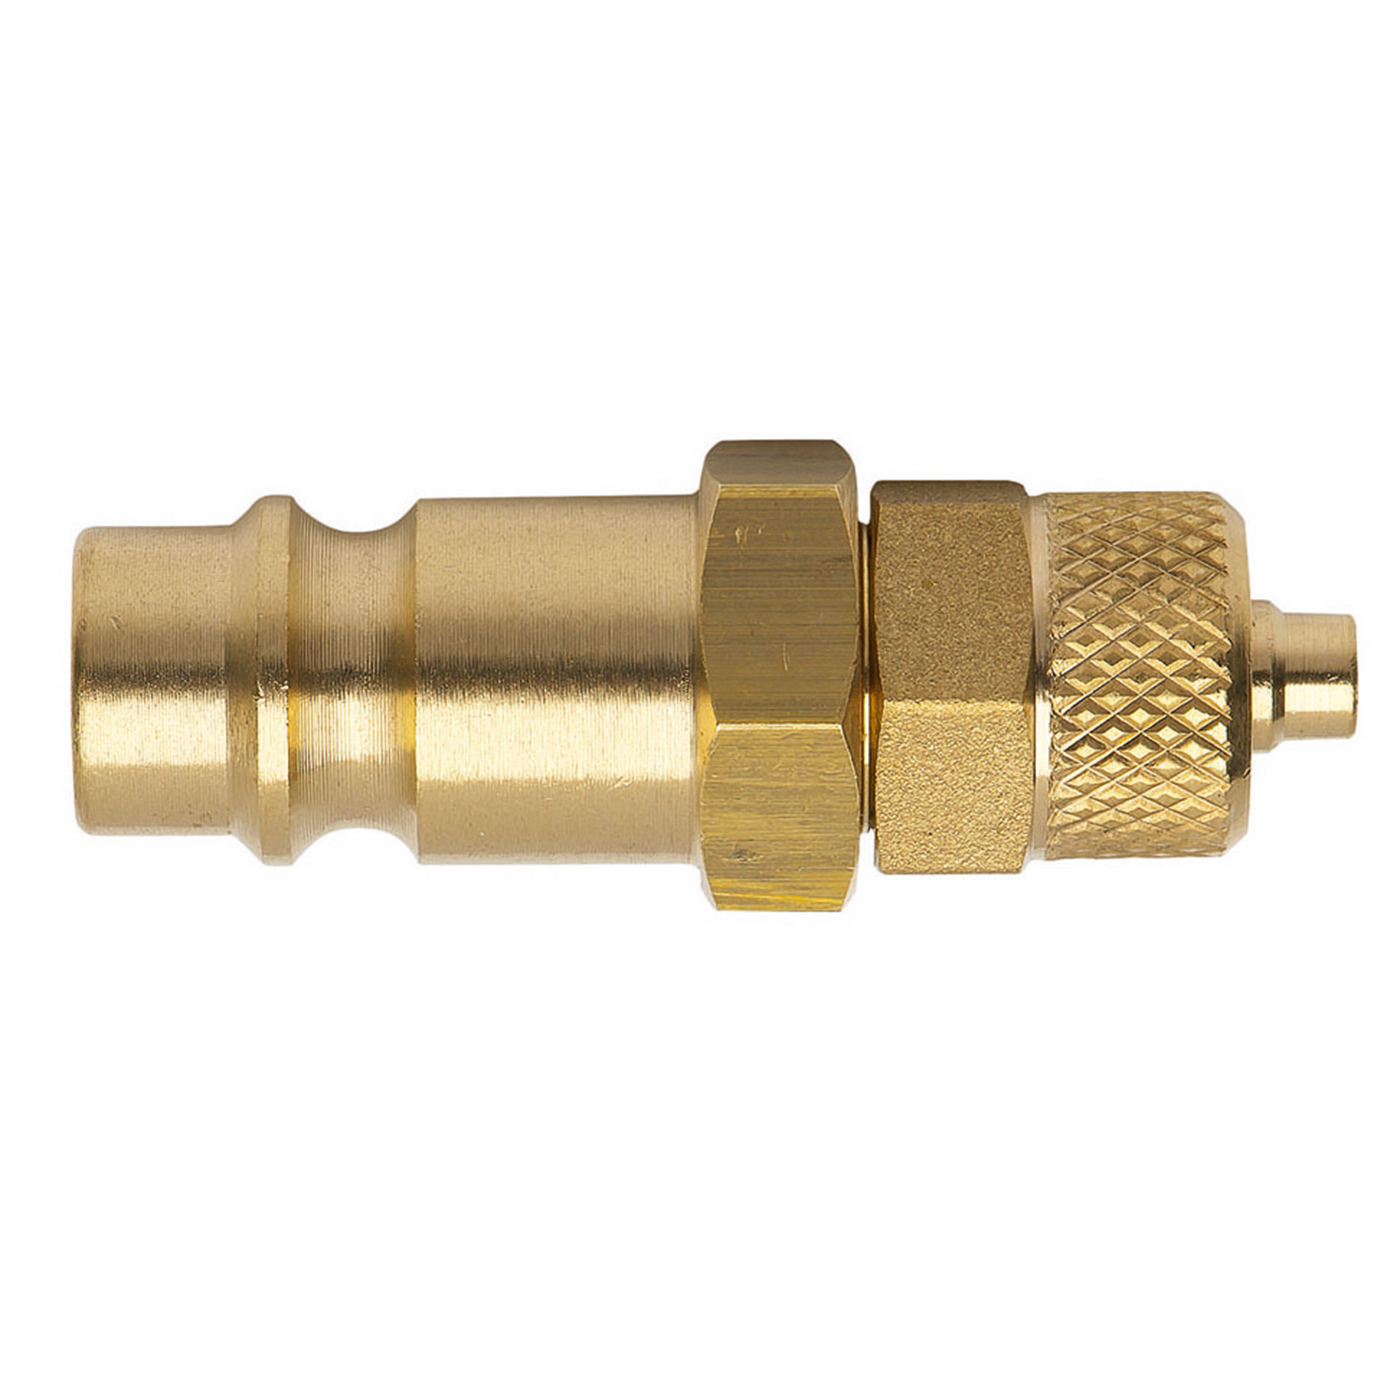 Plug DN 7.2 with Quick Coupling, for Hose 6x4 mm - 1 piece